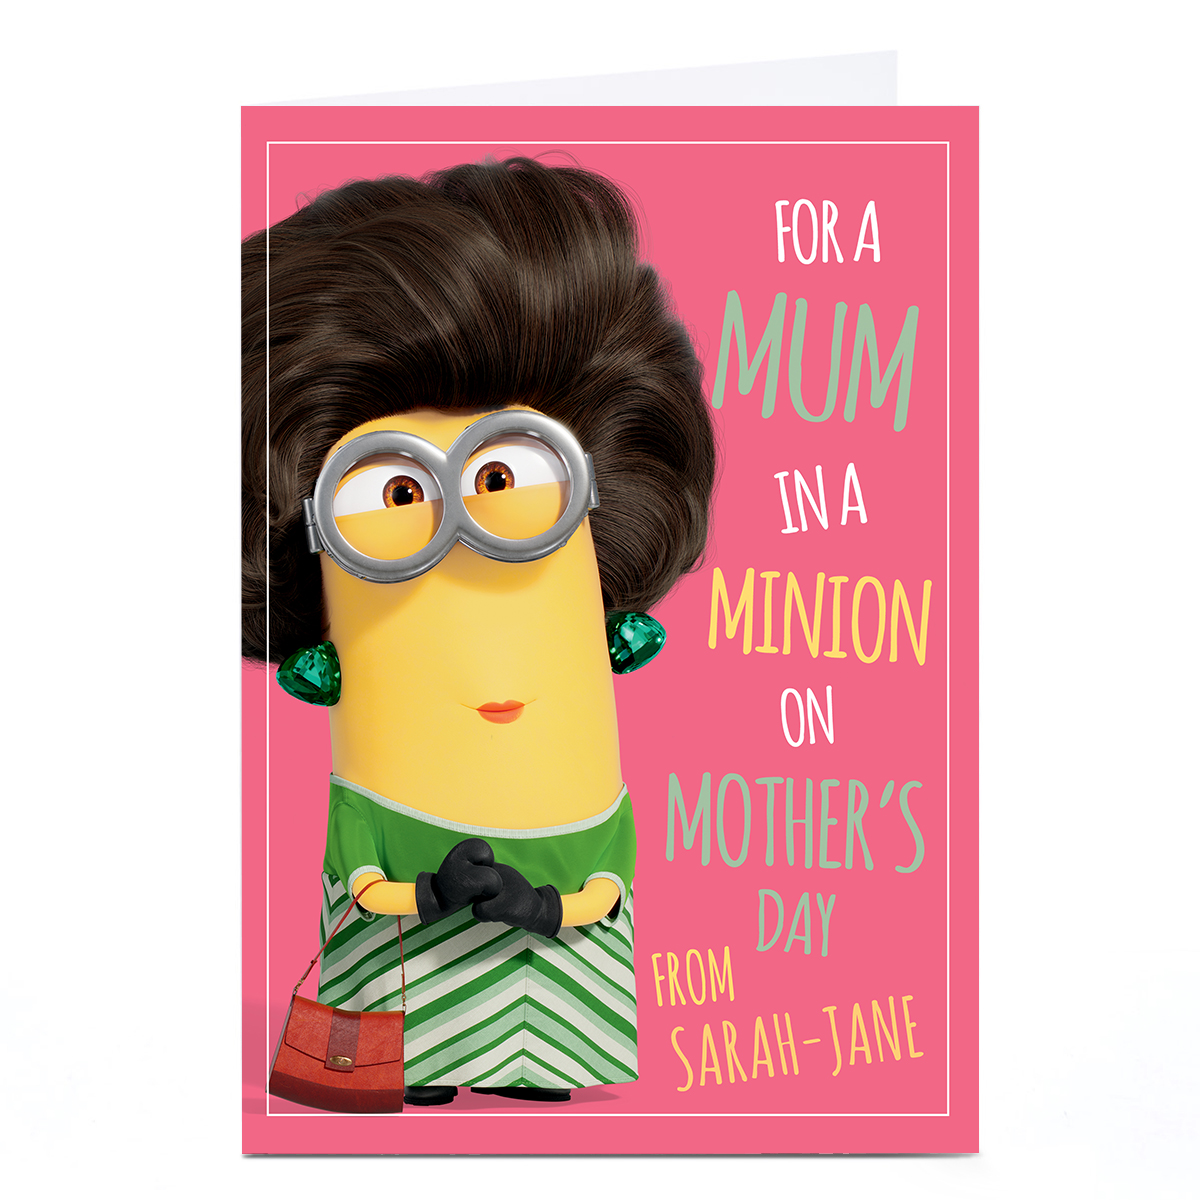 Personalised Minions Mother's Day Card - Mum in a Minion